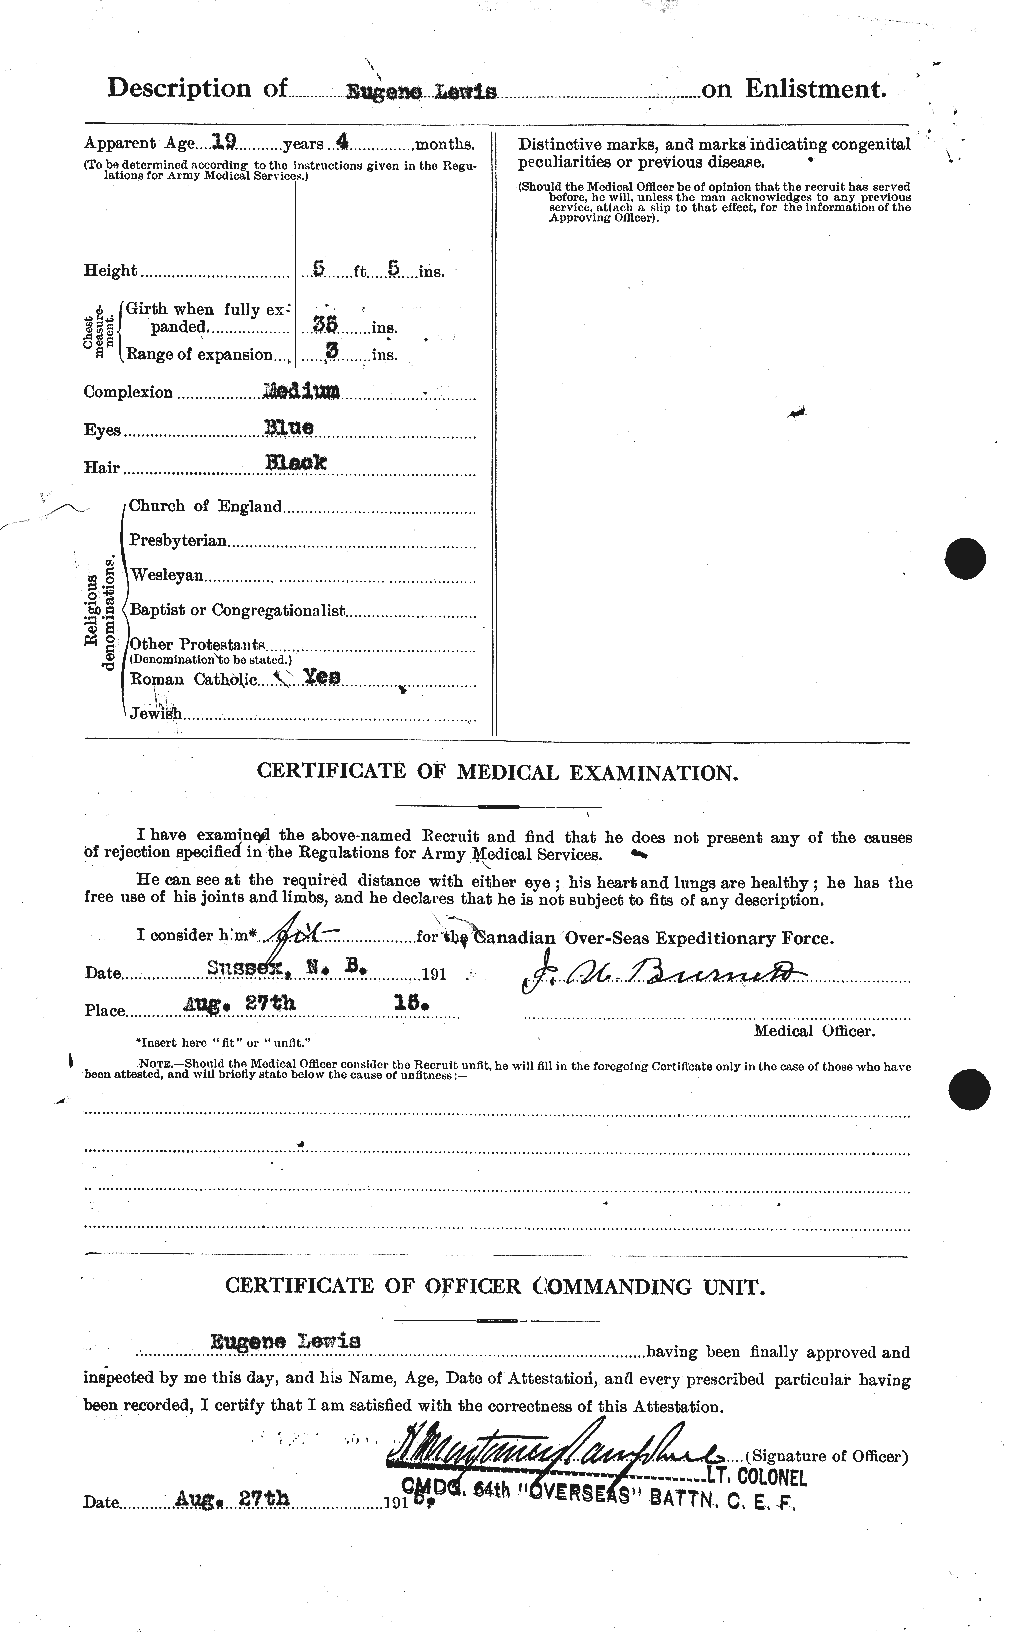 Personnel Records of the First World War - CEF 465037b